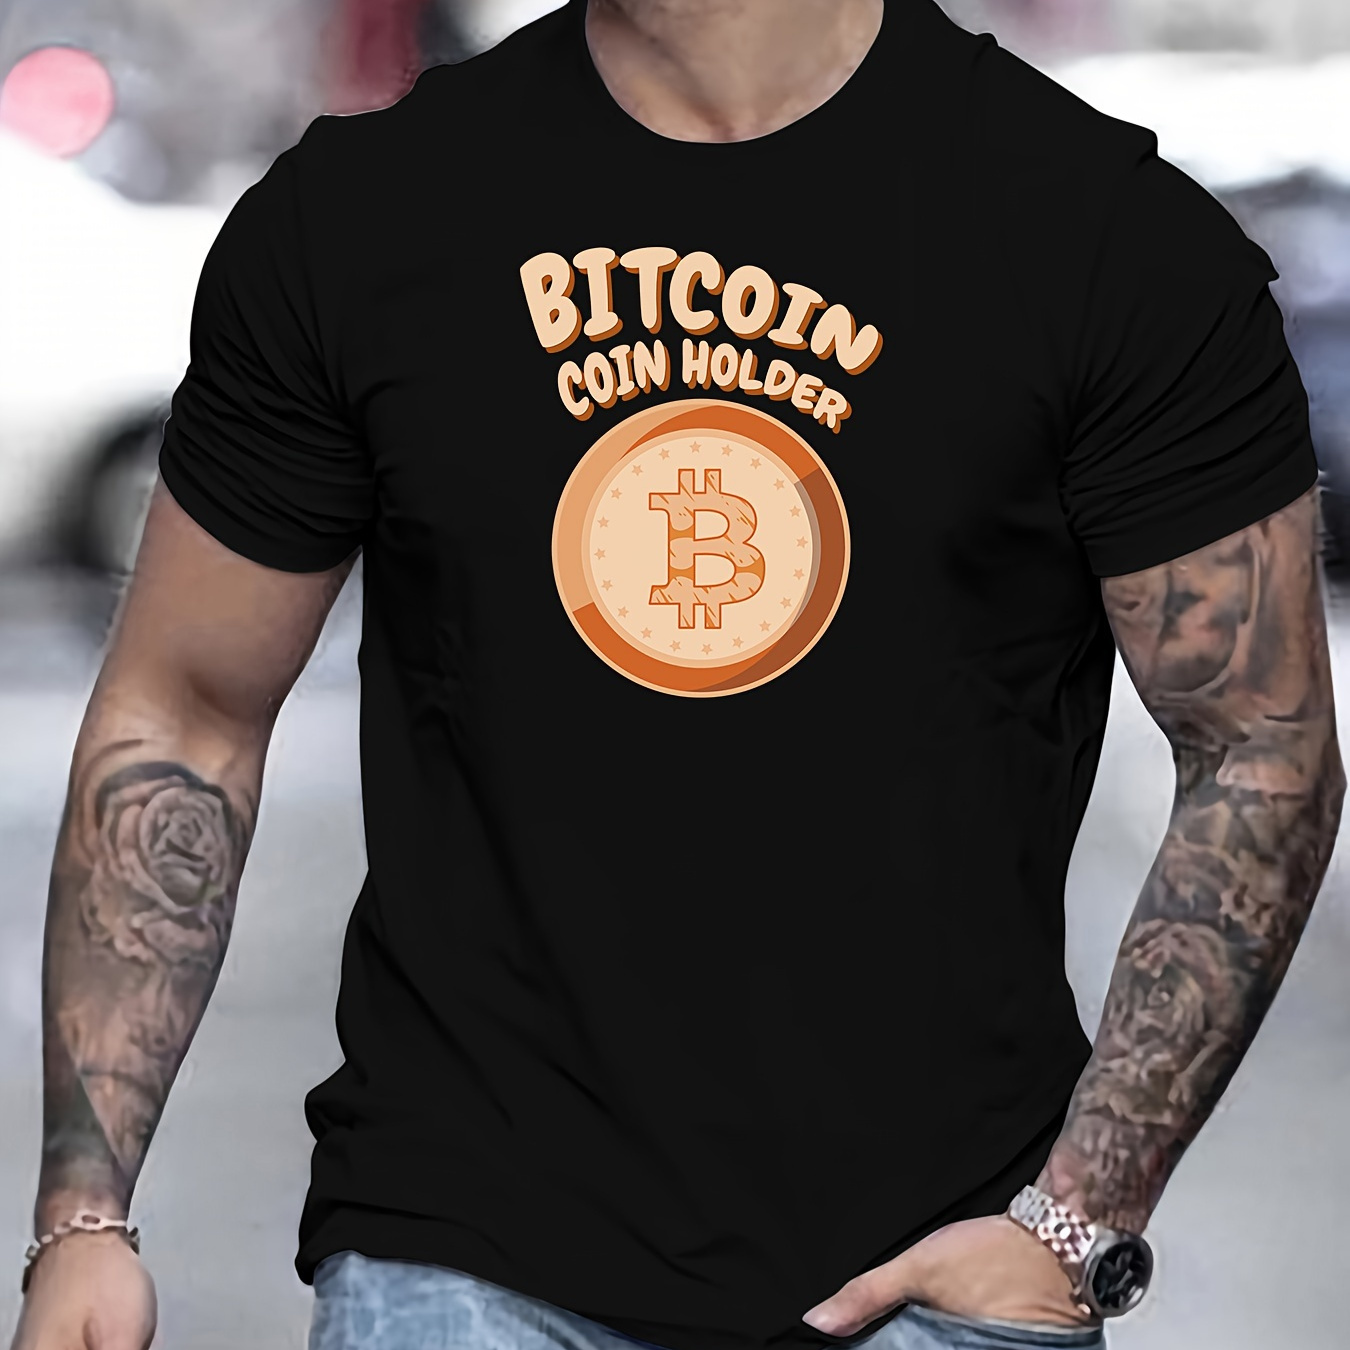 

Men's Bitcoin Pattern Short-sleeved T-shirt For Spring, Summer, And Autumn Casual Wear With A Round Neck